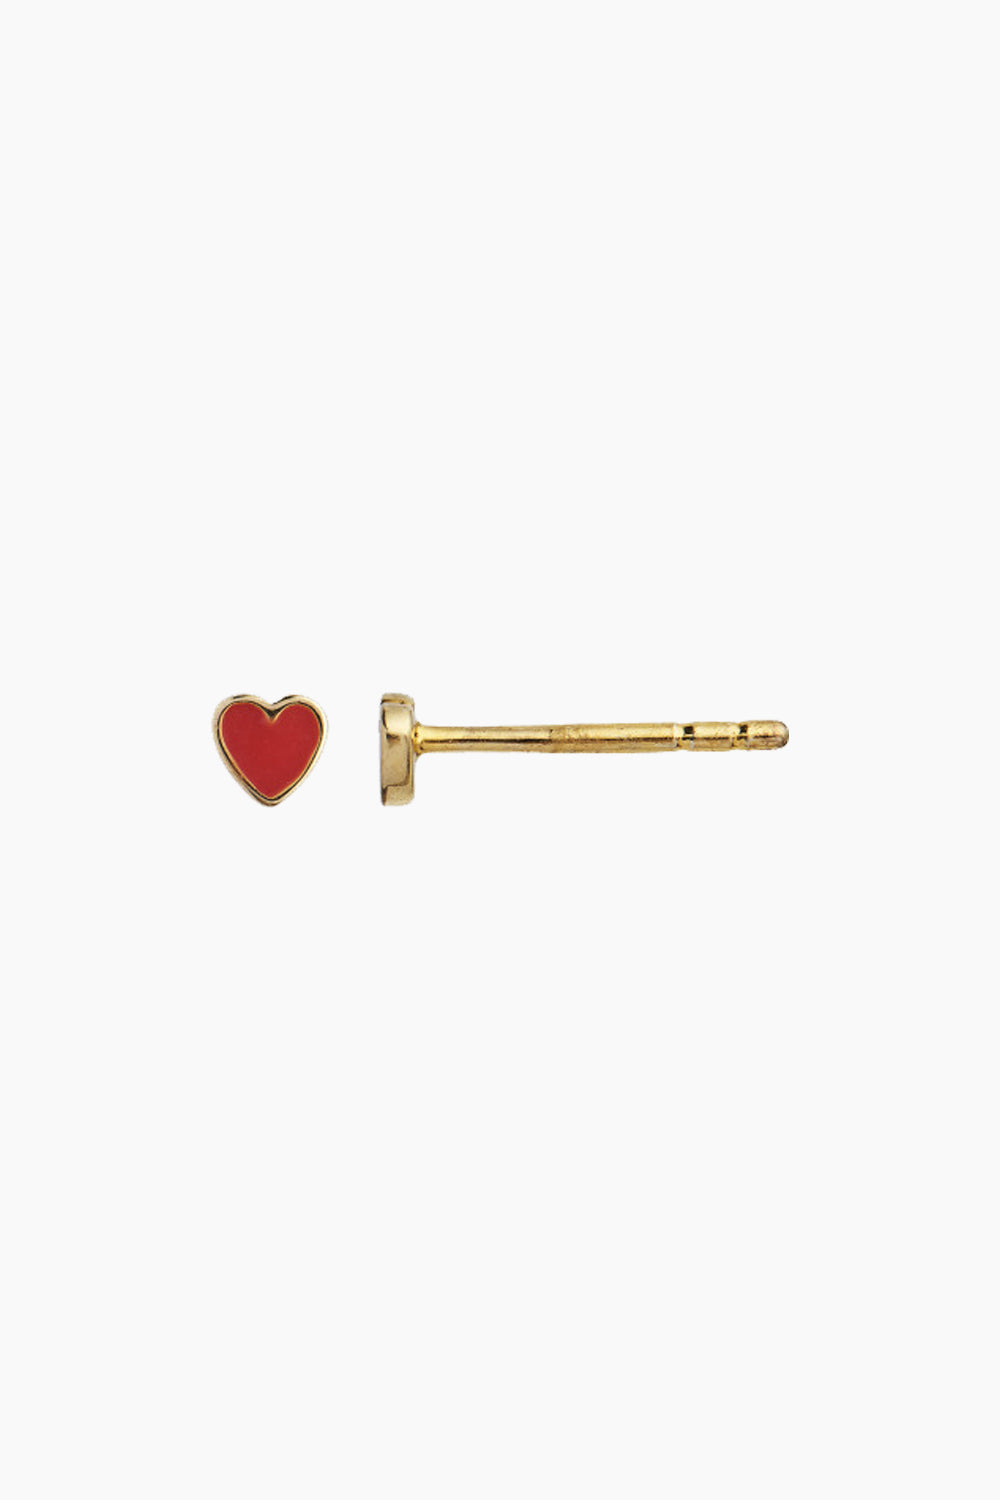 Petit Love Heart - Red Coral Enamel - Gold - Stine A